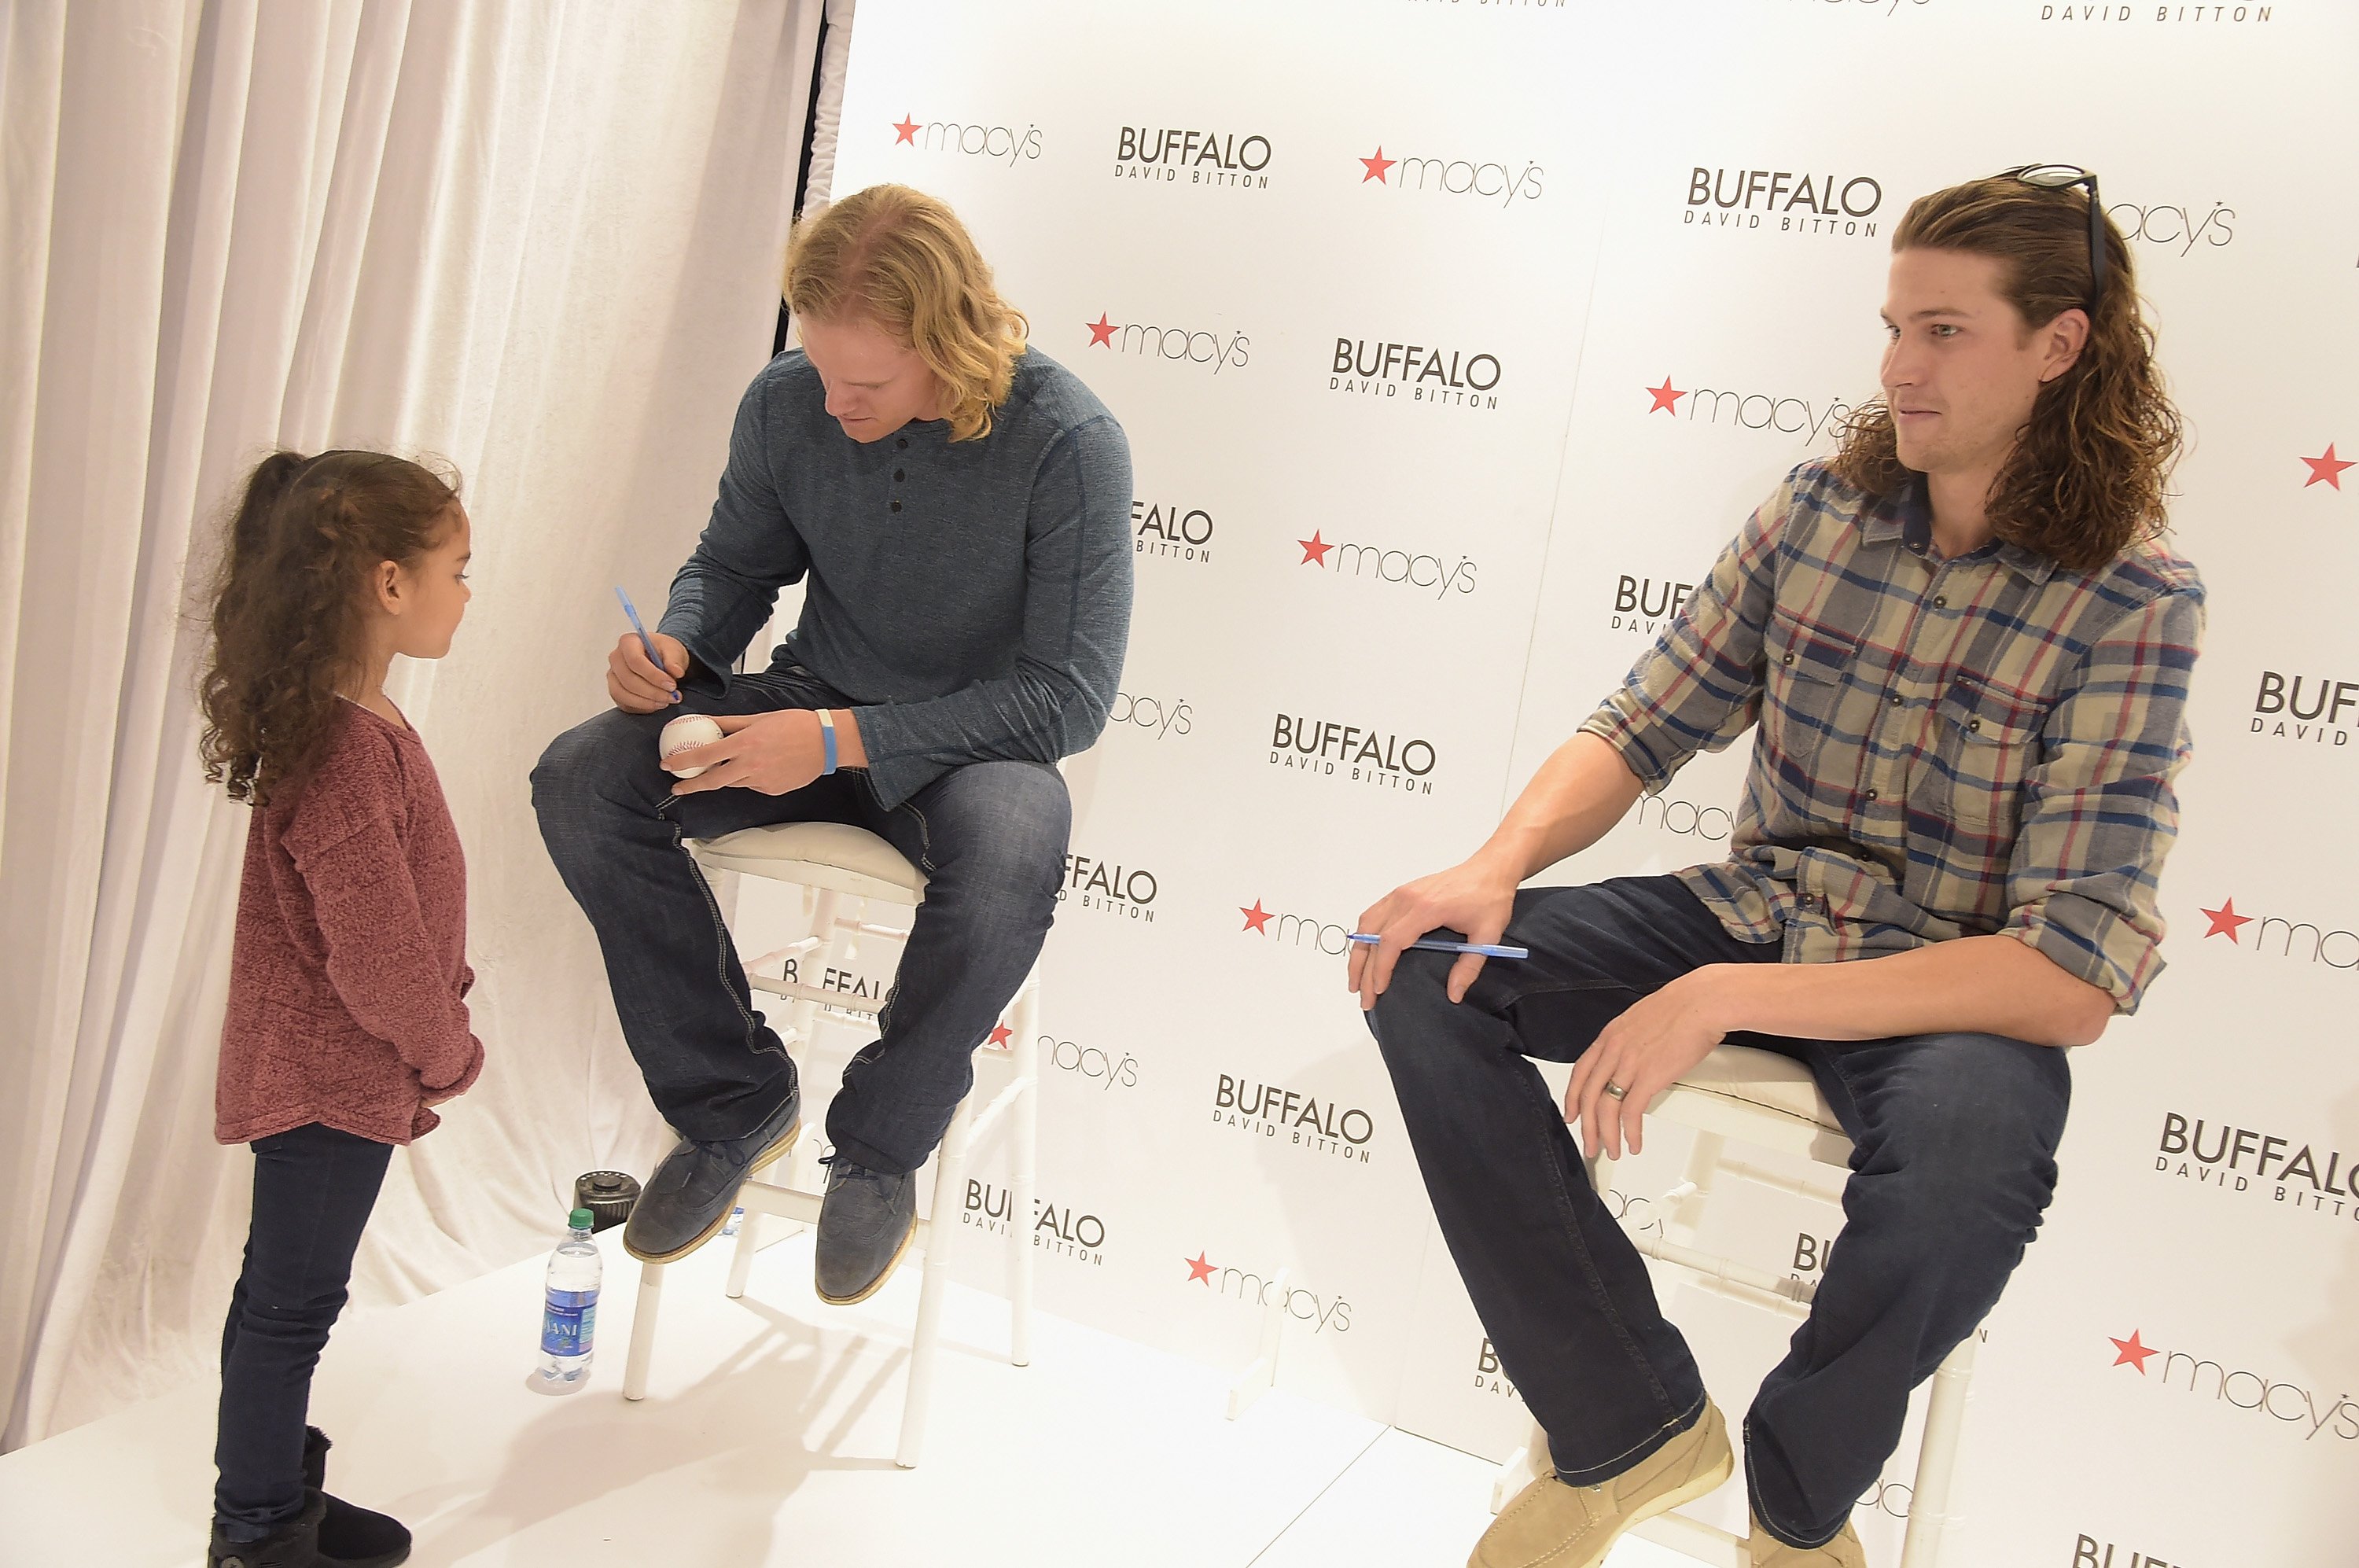 Noah Syndergaard and Jacob deGrom pose with a young fan at Macy's Herald Square in New York City on November 5, 2015. | Source: Getty Images